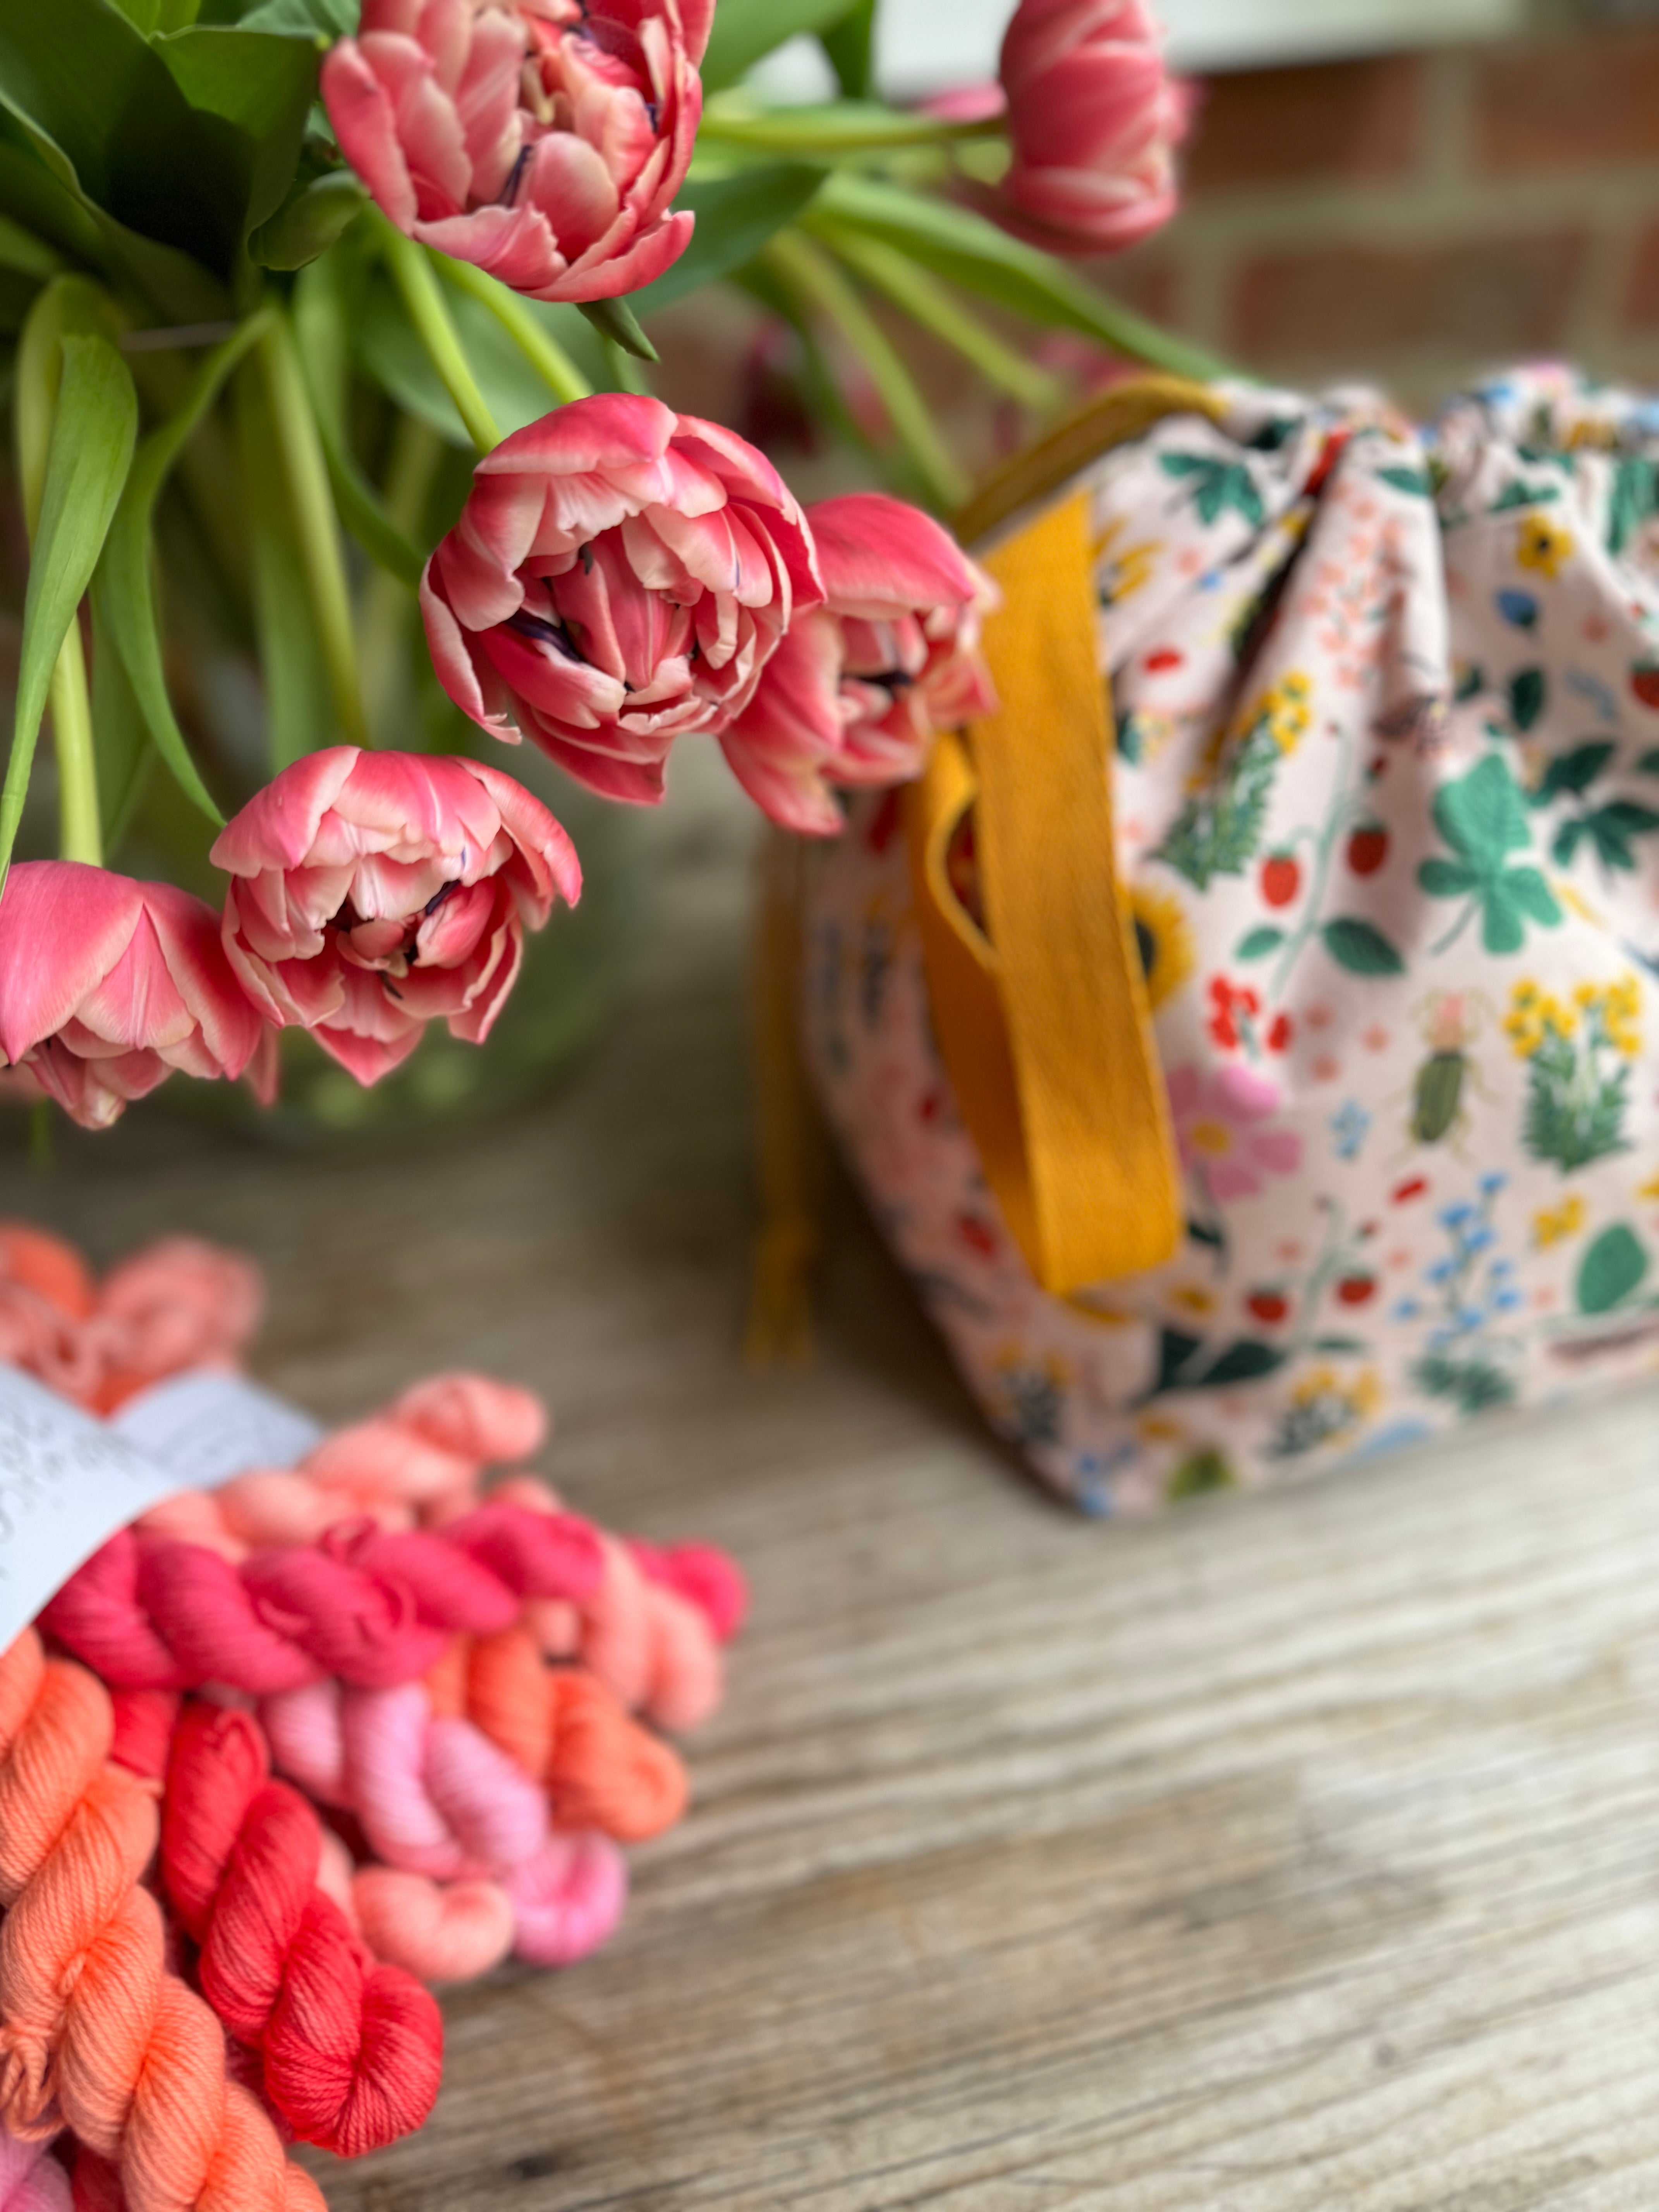 Made to order - Project Bag Style 01 - Florals + Bugs